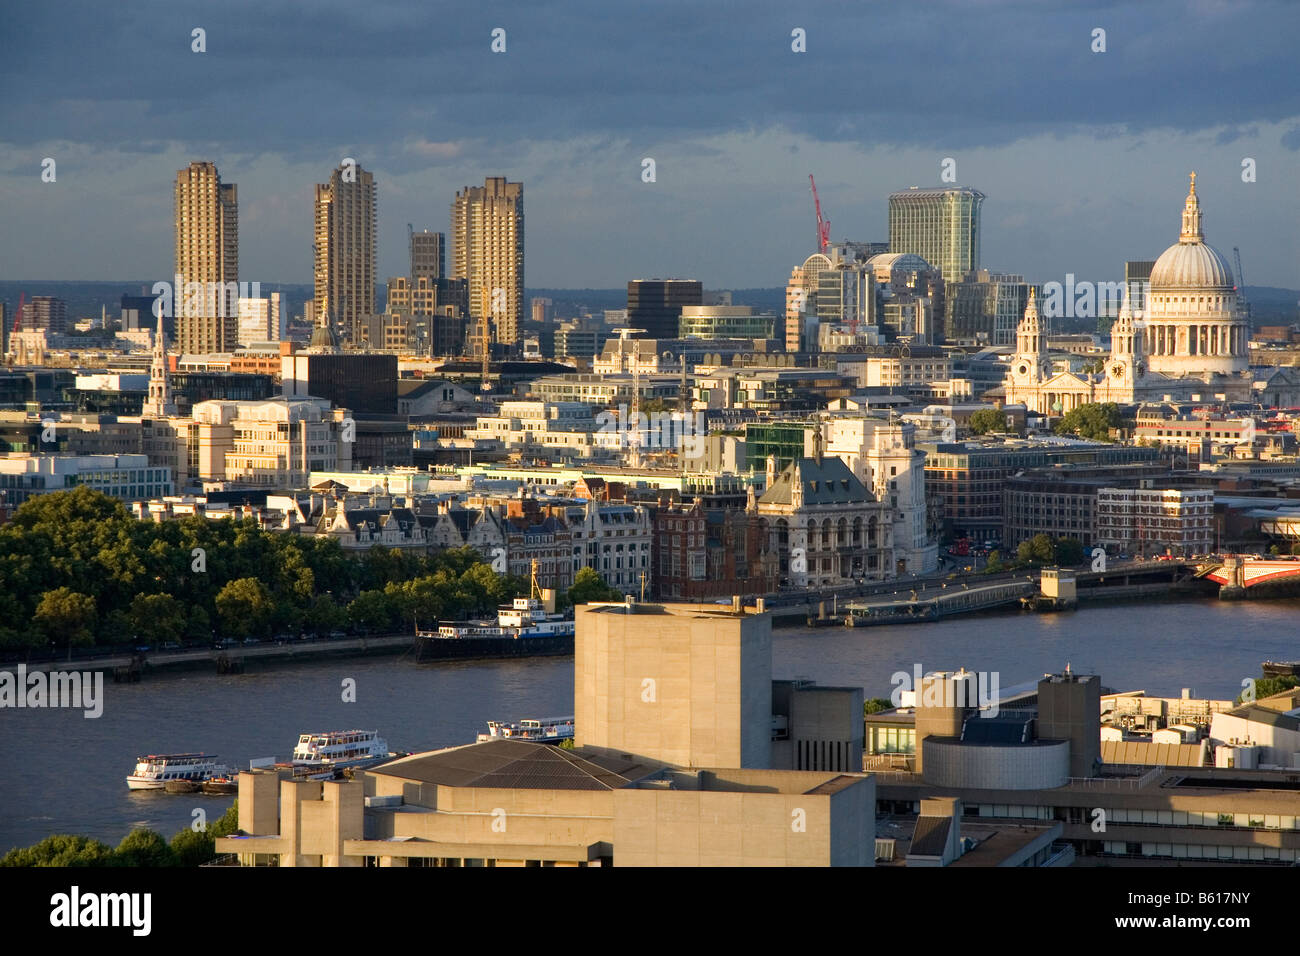 View from the London Eye of the city of London England Stock Photo